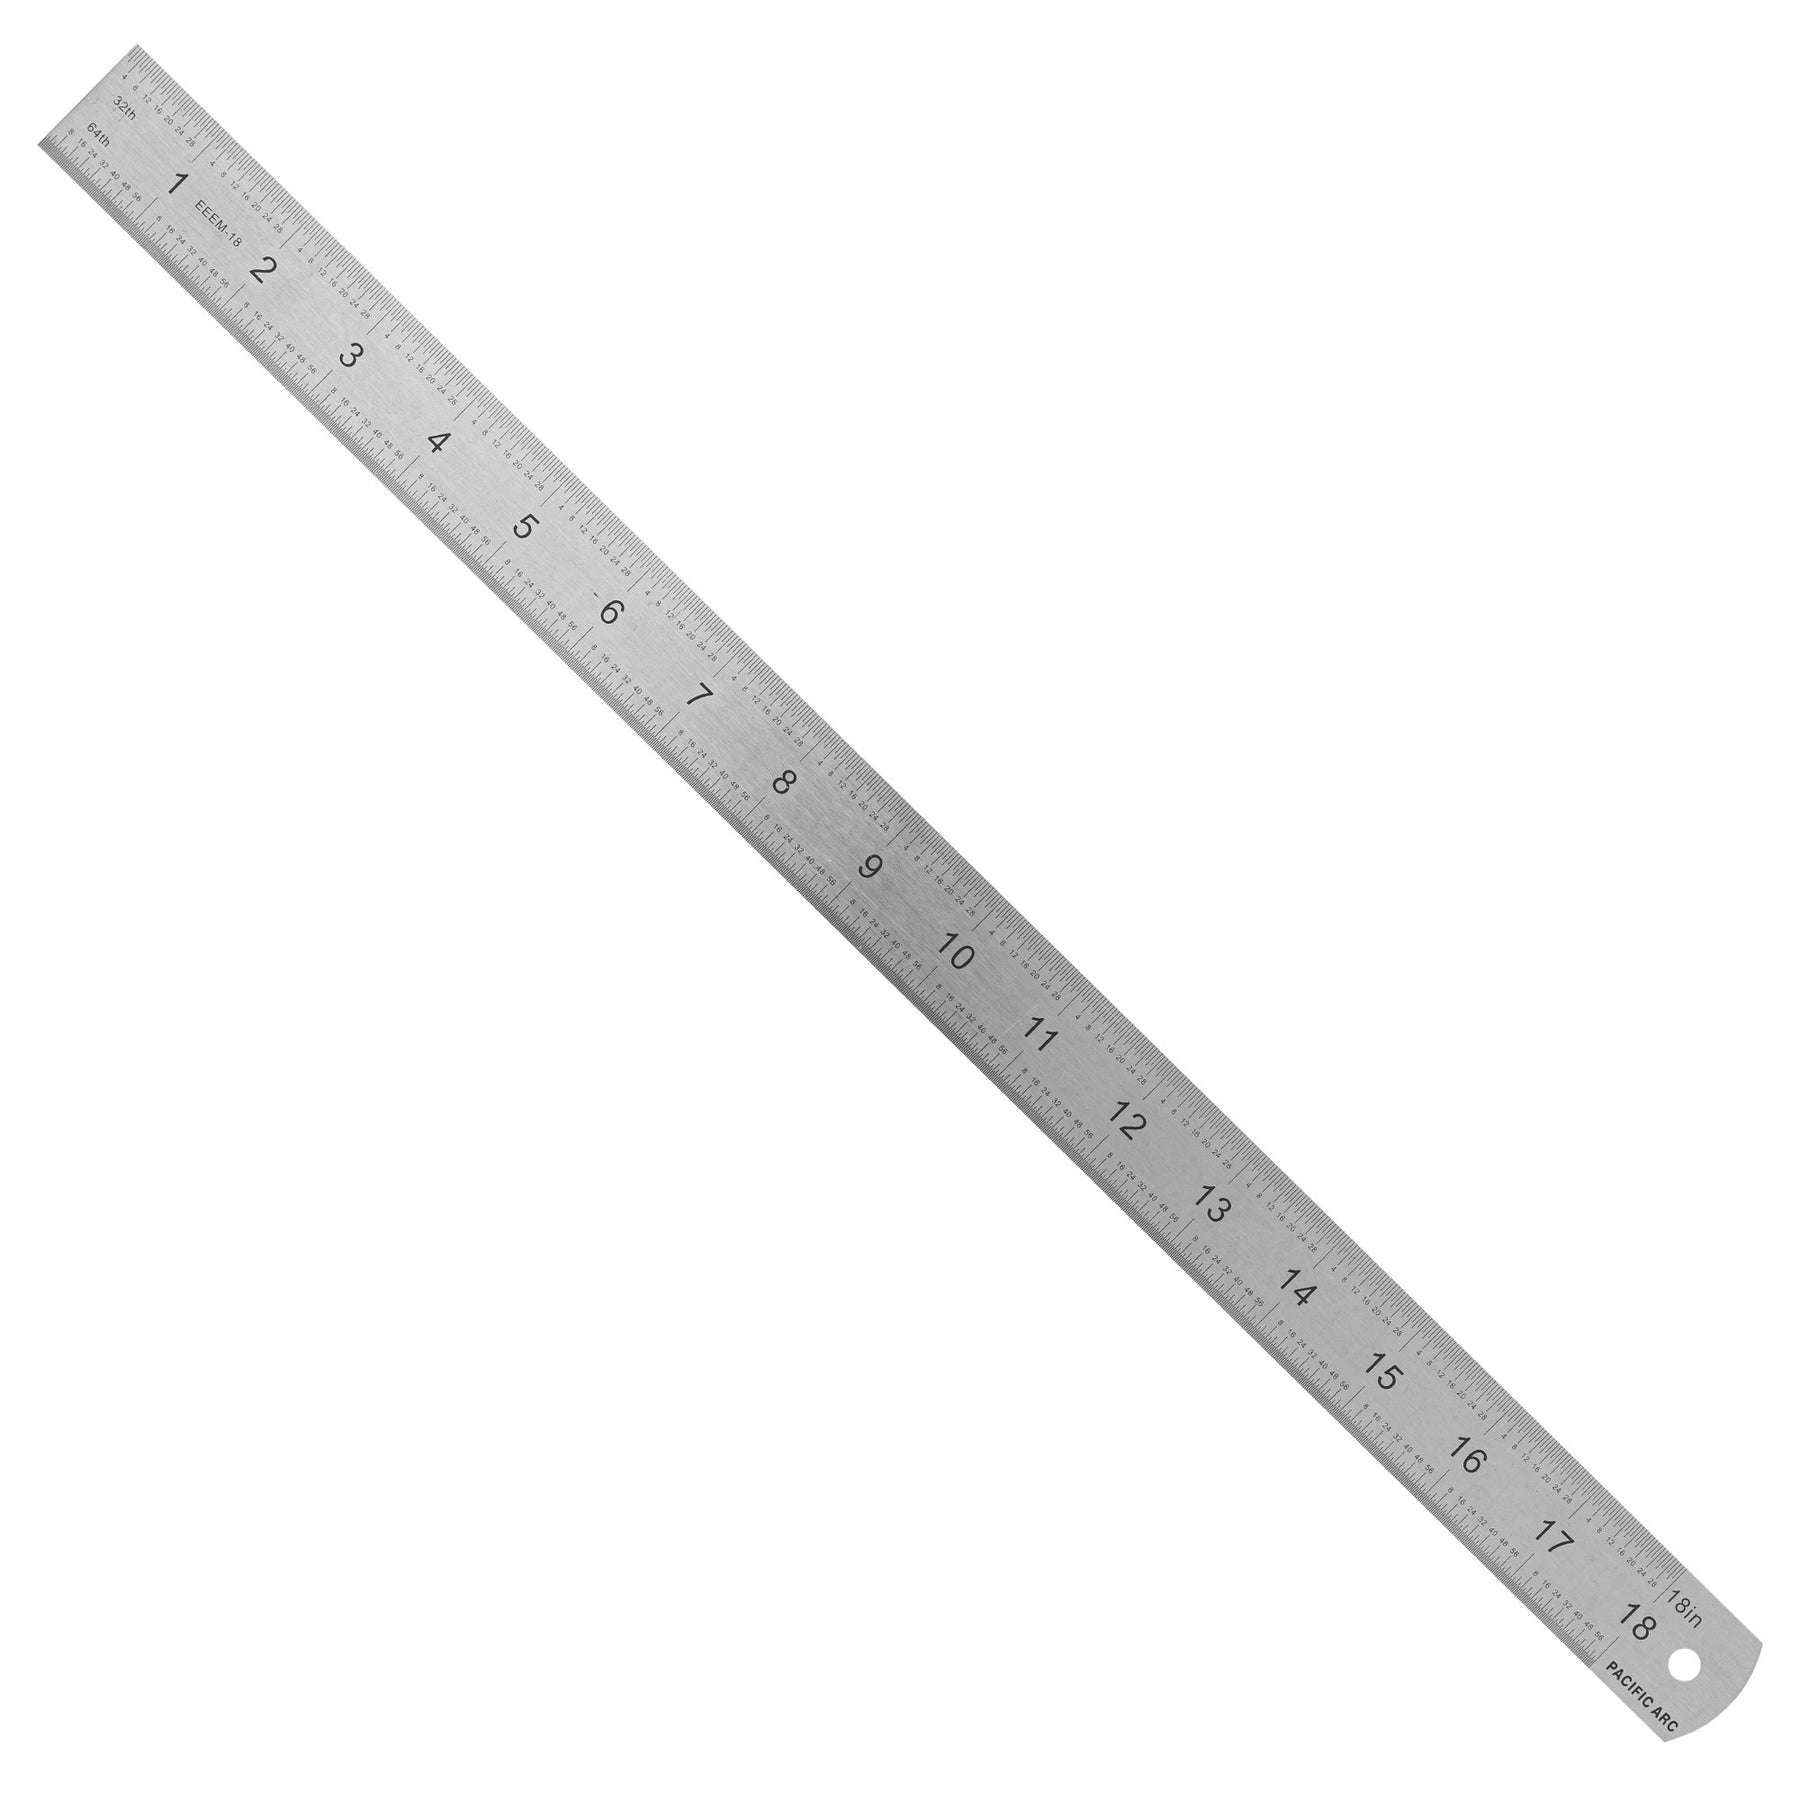 Pacific Arc 6 Inch Stainless Steel Ruler with Inch/Metric Conversion Table